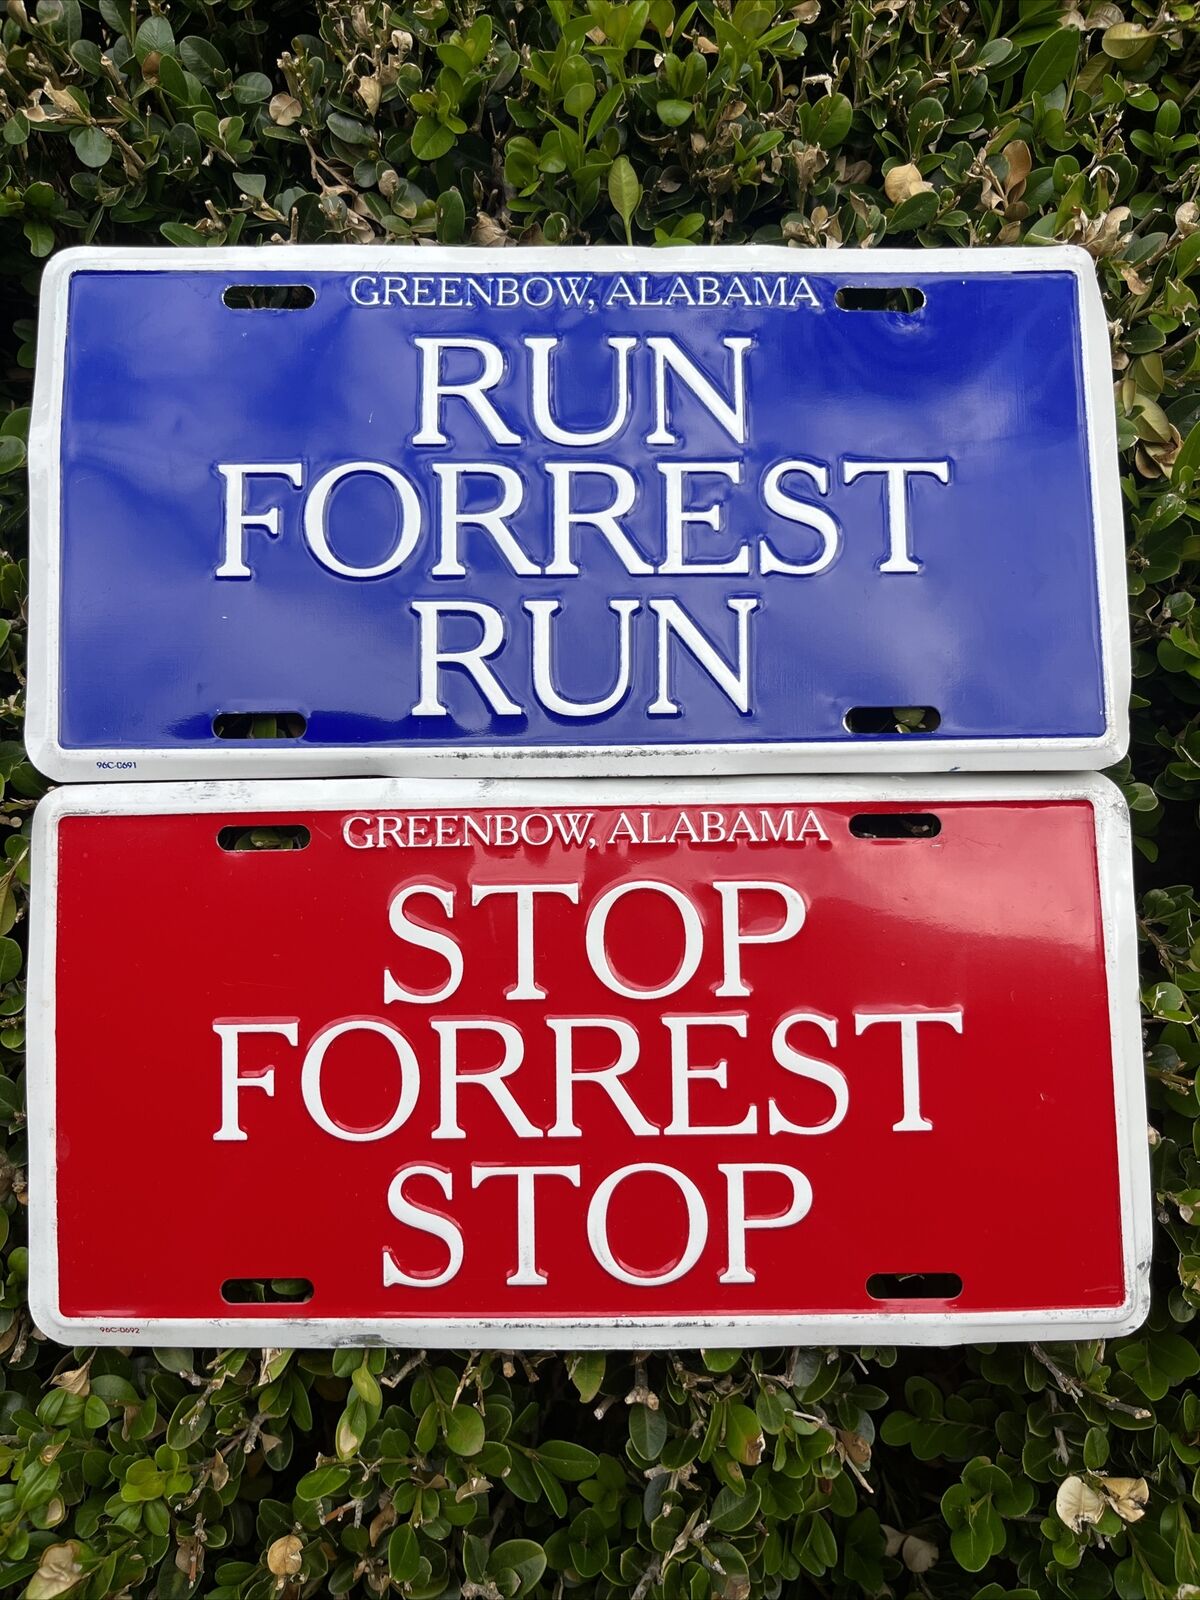 Forrest Gump Run Forrest Run Greenbow Alabama License Plates Stop Forrest Stop